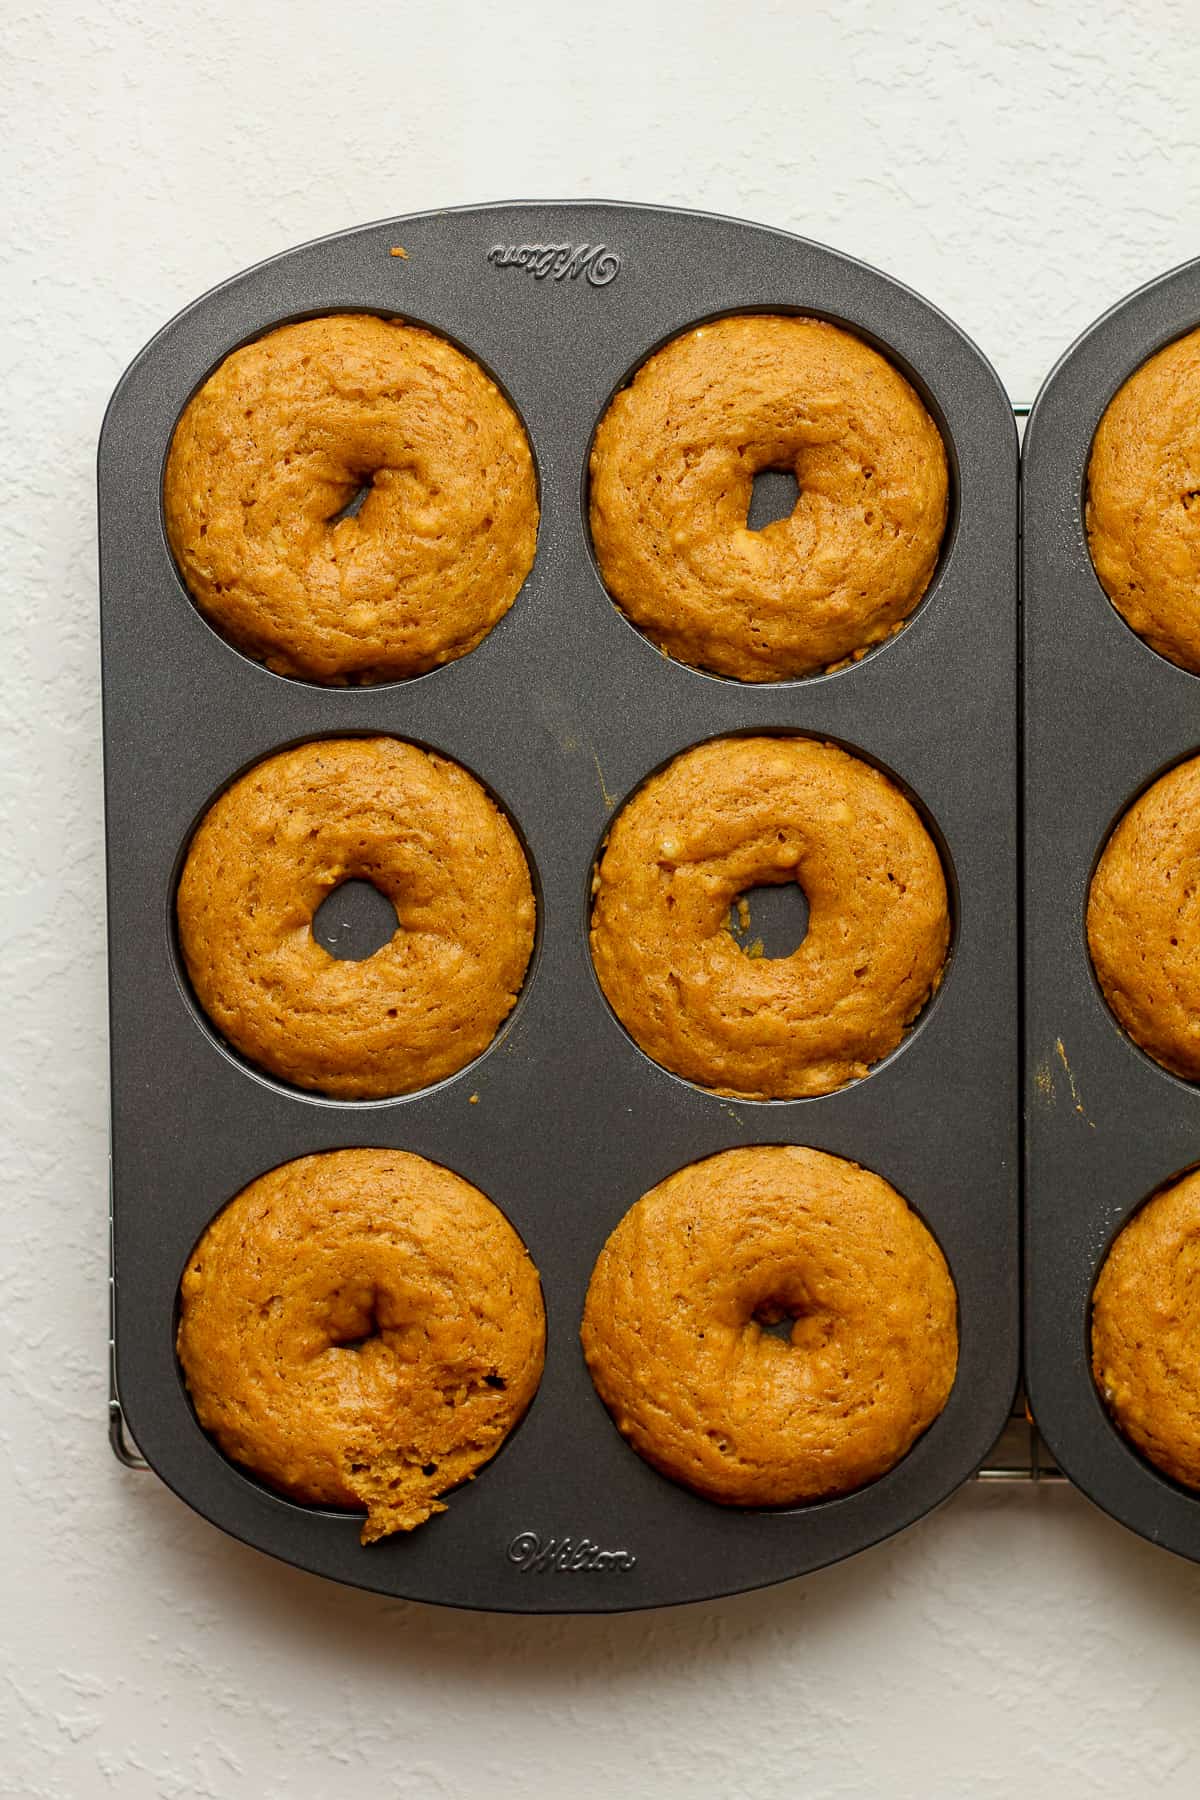 Donut pans with just baked pumpkin donuts.